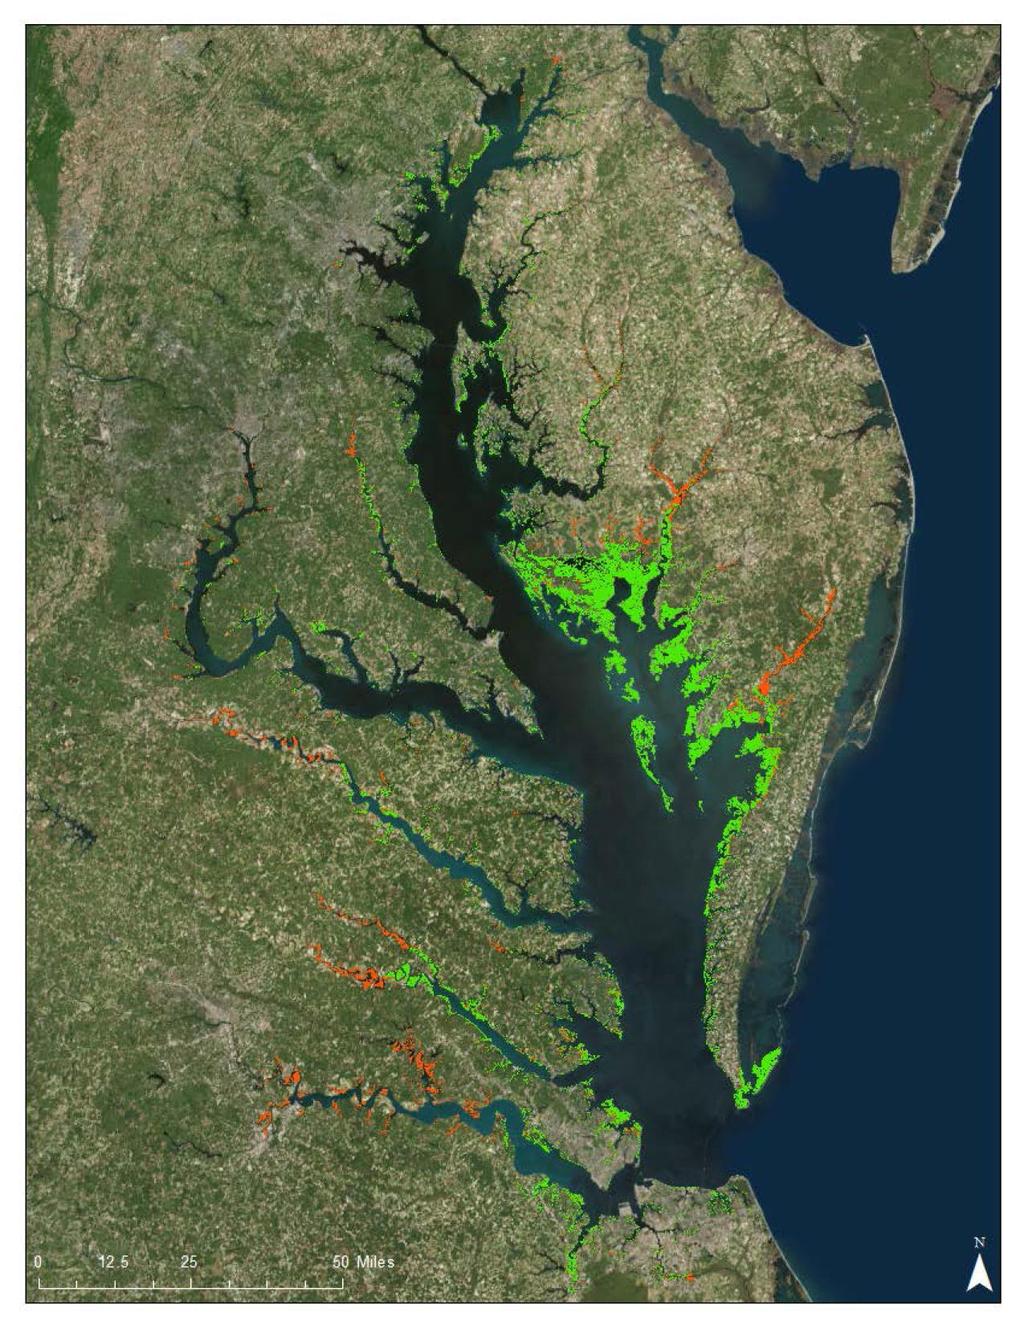 Chesapeake Bay Tidal Wetlands Extent from National Wetlands Inventory. Determined largely from vegetation perceived via aerial photography.